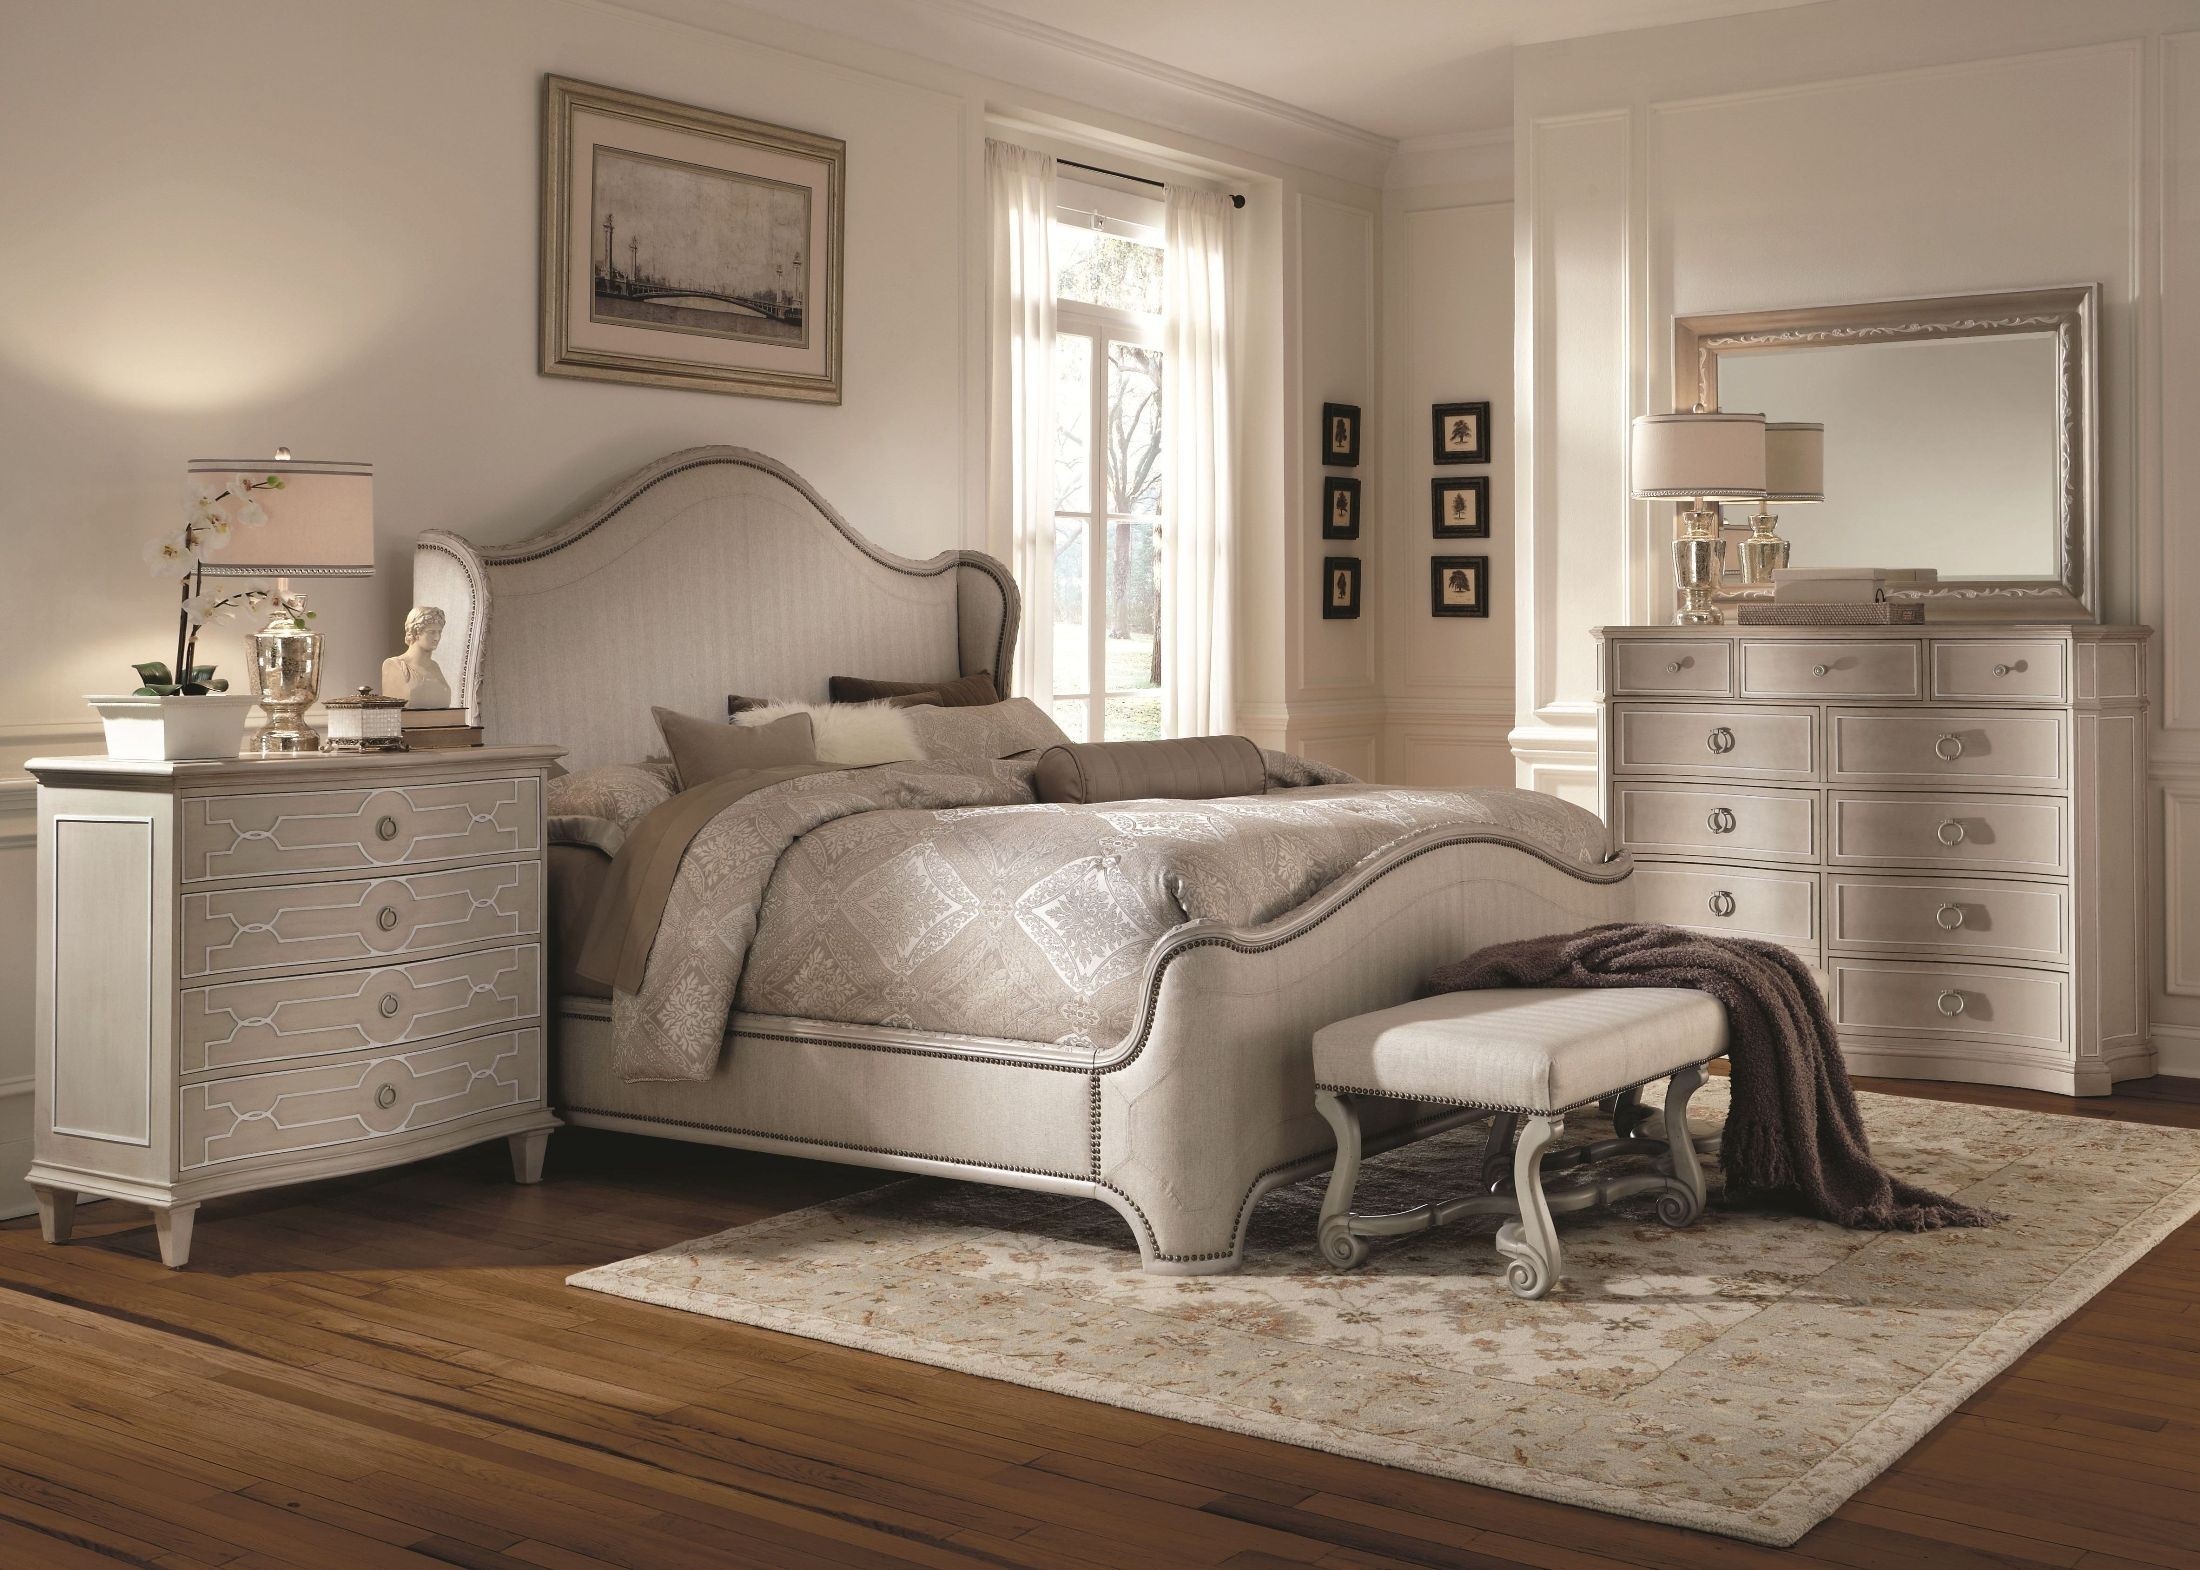 Chateaux grey upholstered shelter bedroom set from art